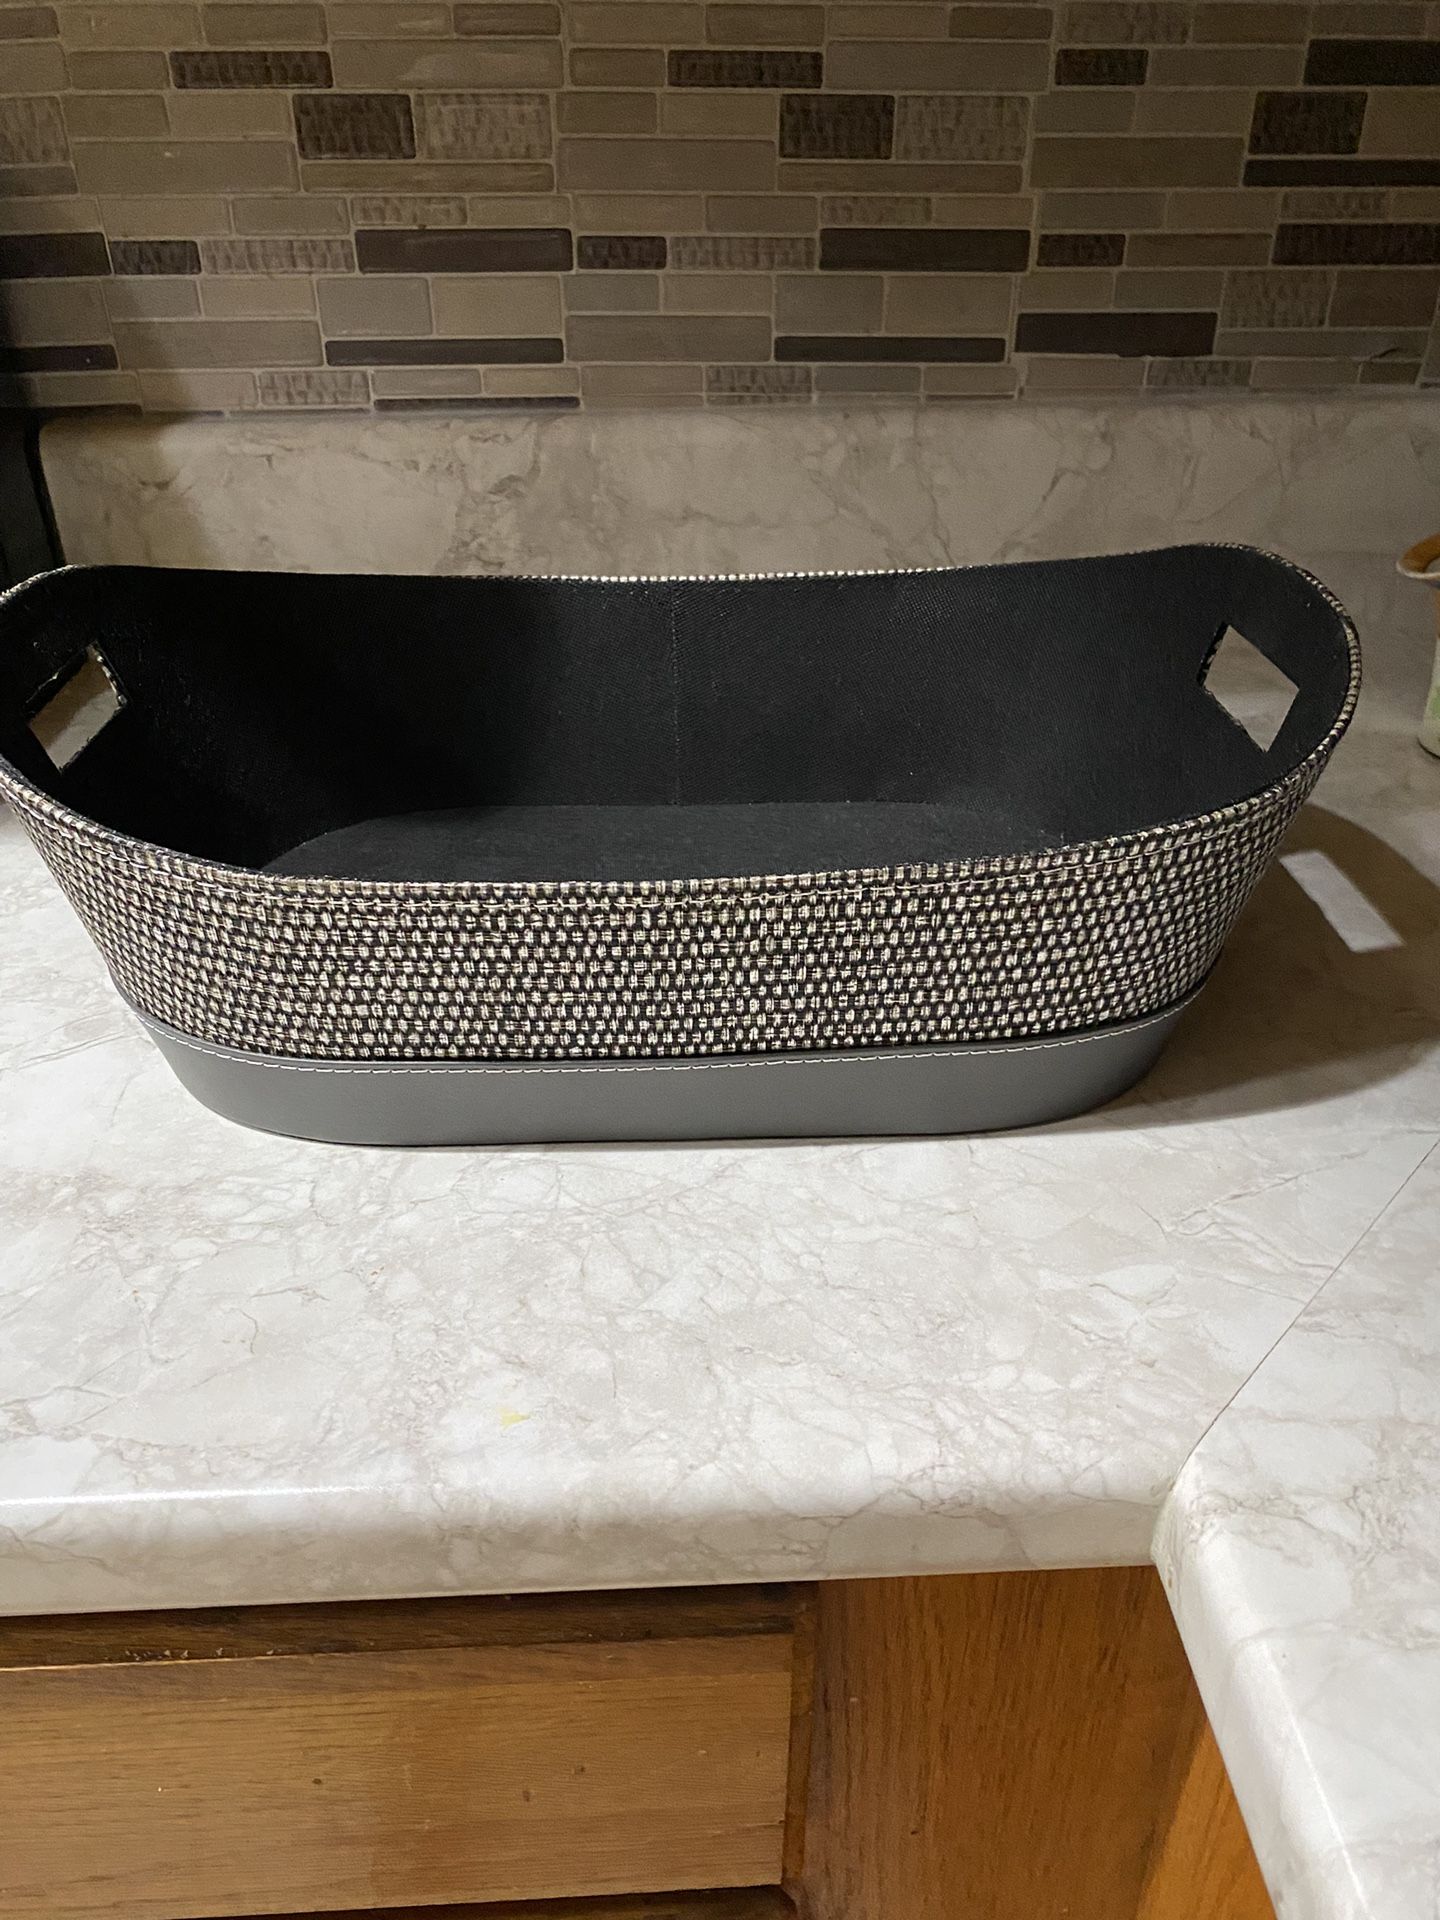 Large Tray With Handles. Read Description For Details And Location.